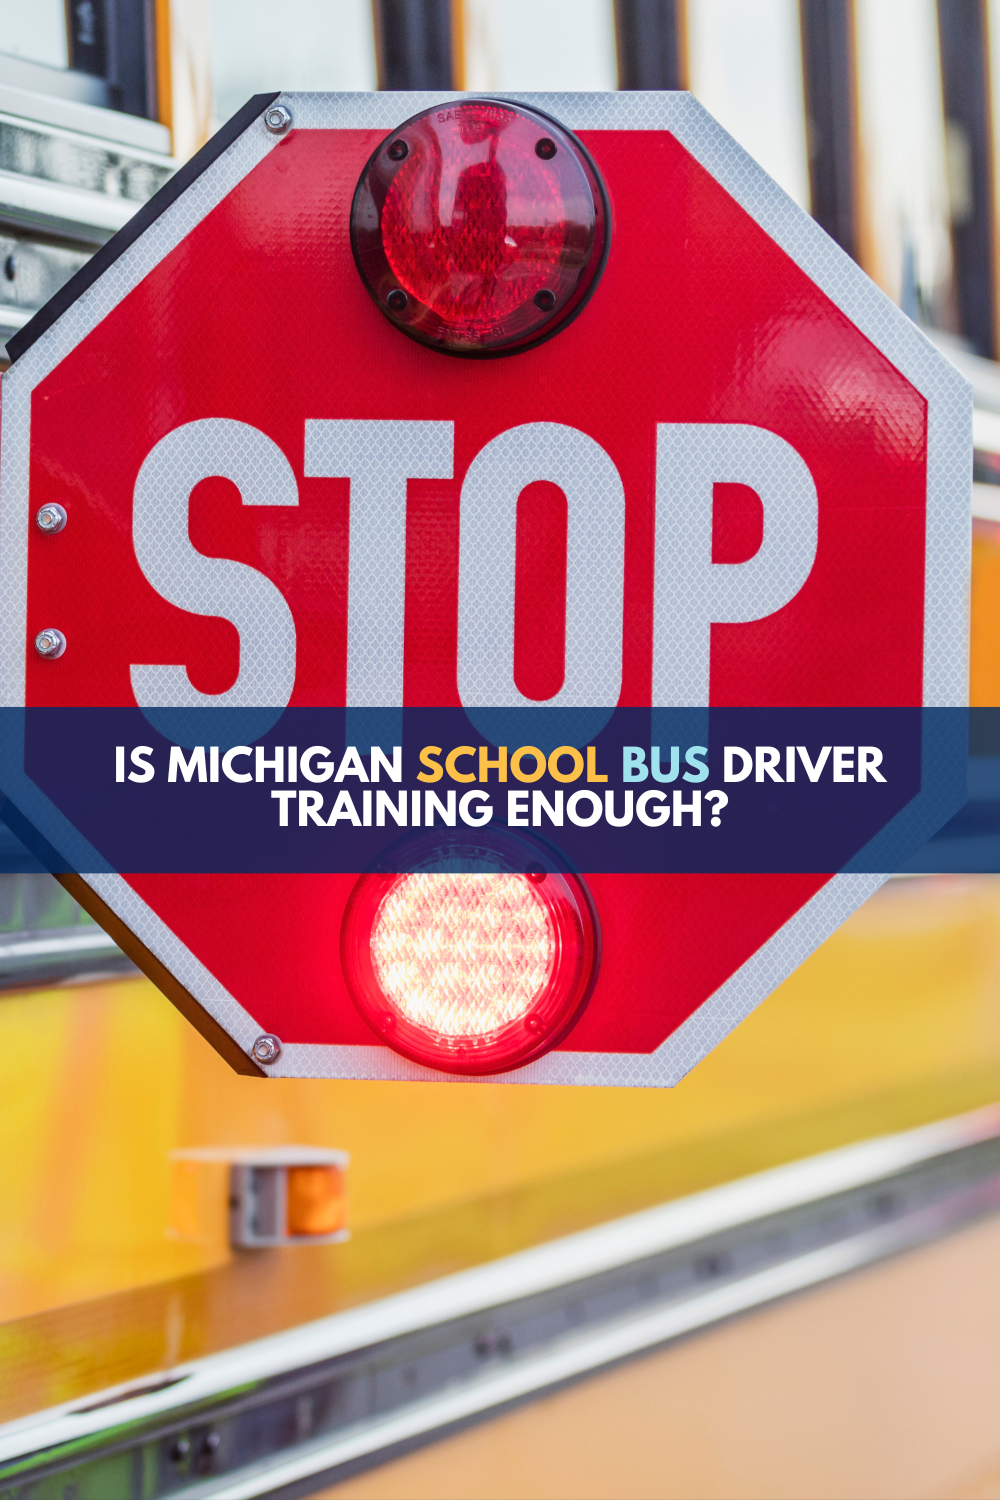 Michigan School Bus Driver Training: What Is Required And Is It Enough?